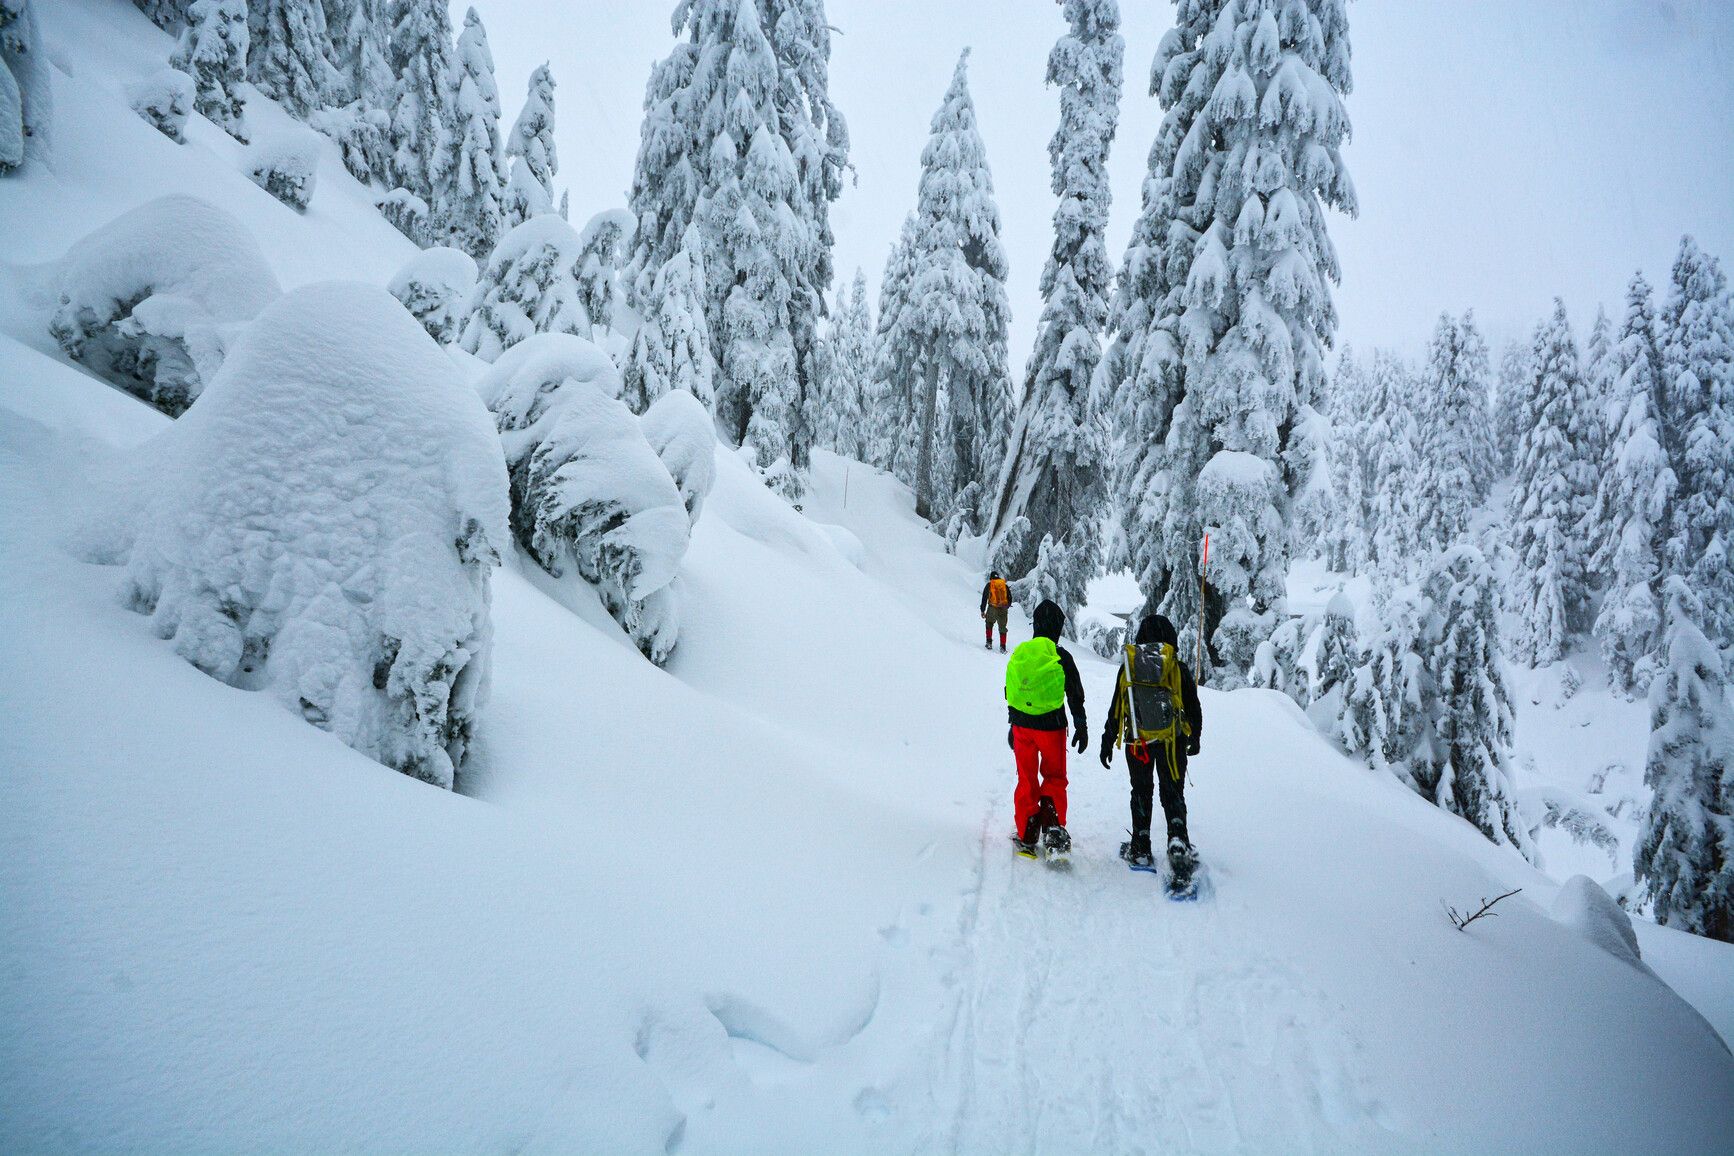 Snowshoers walking through the snow covered forest in Mount Seymour Park.